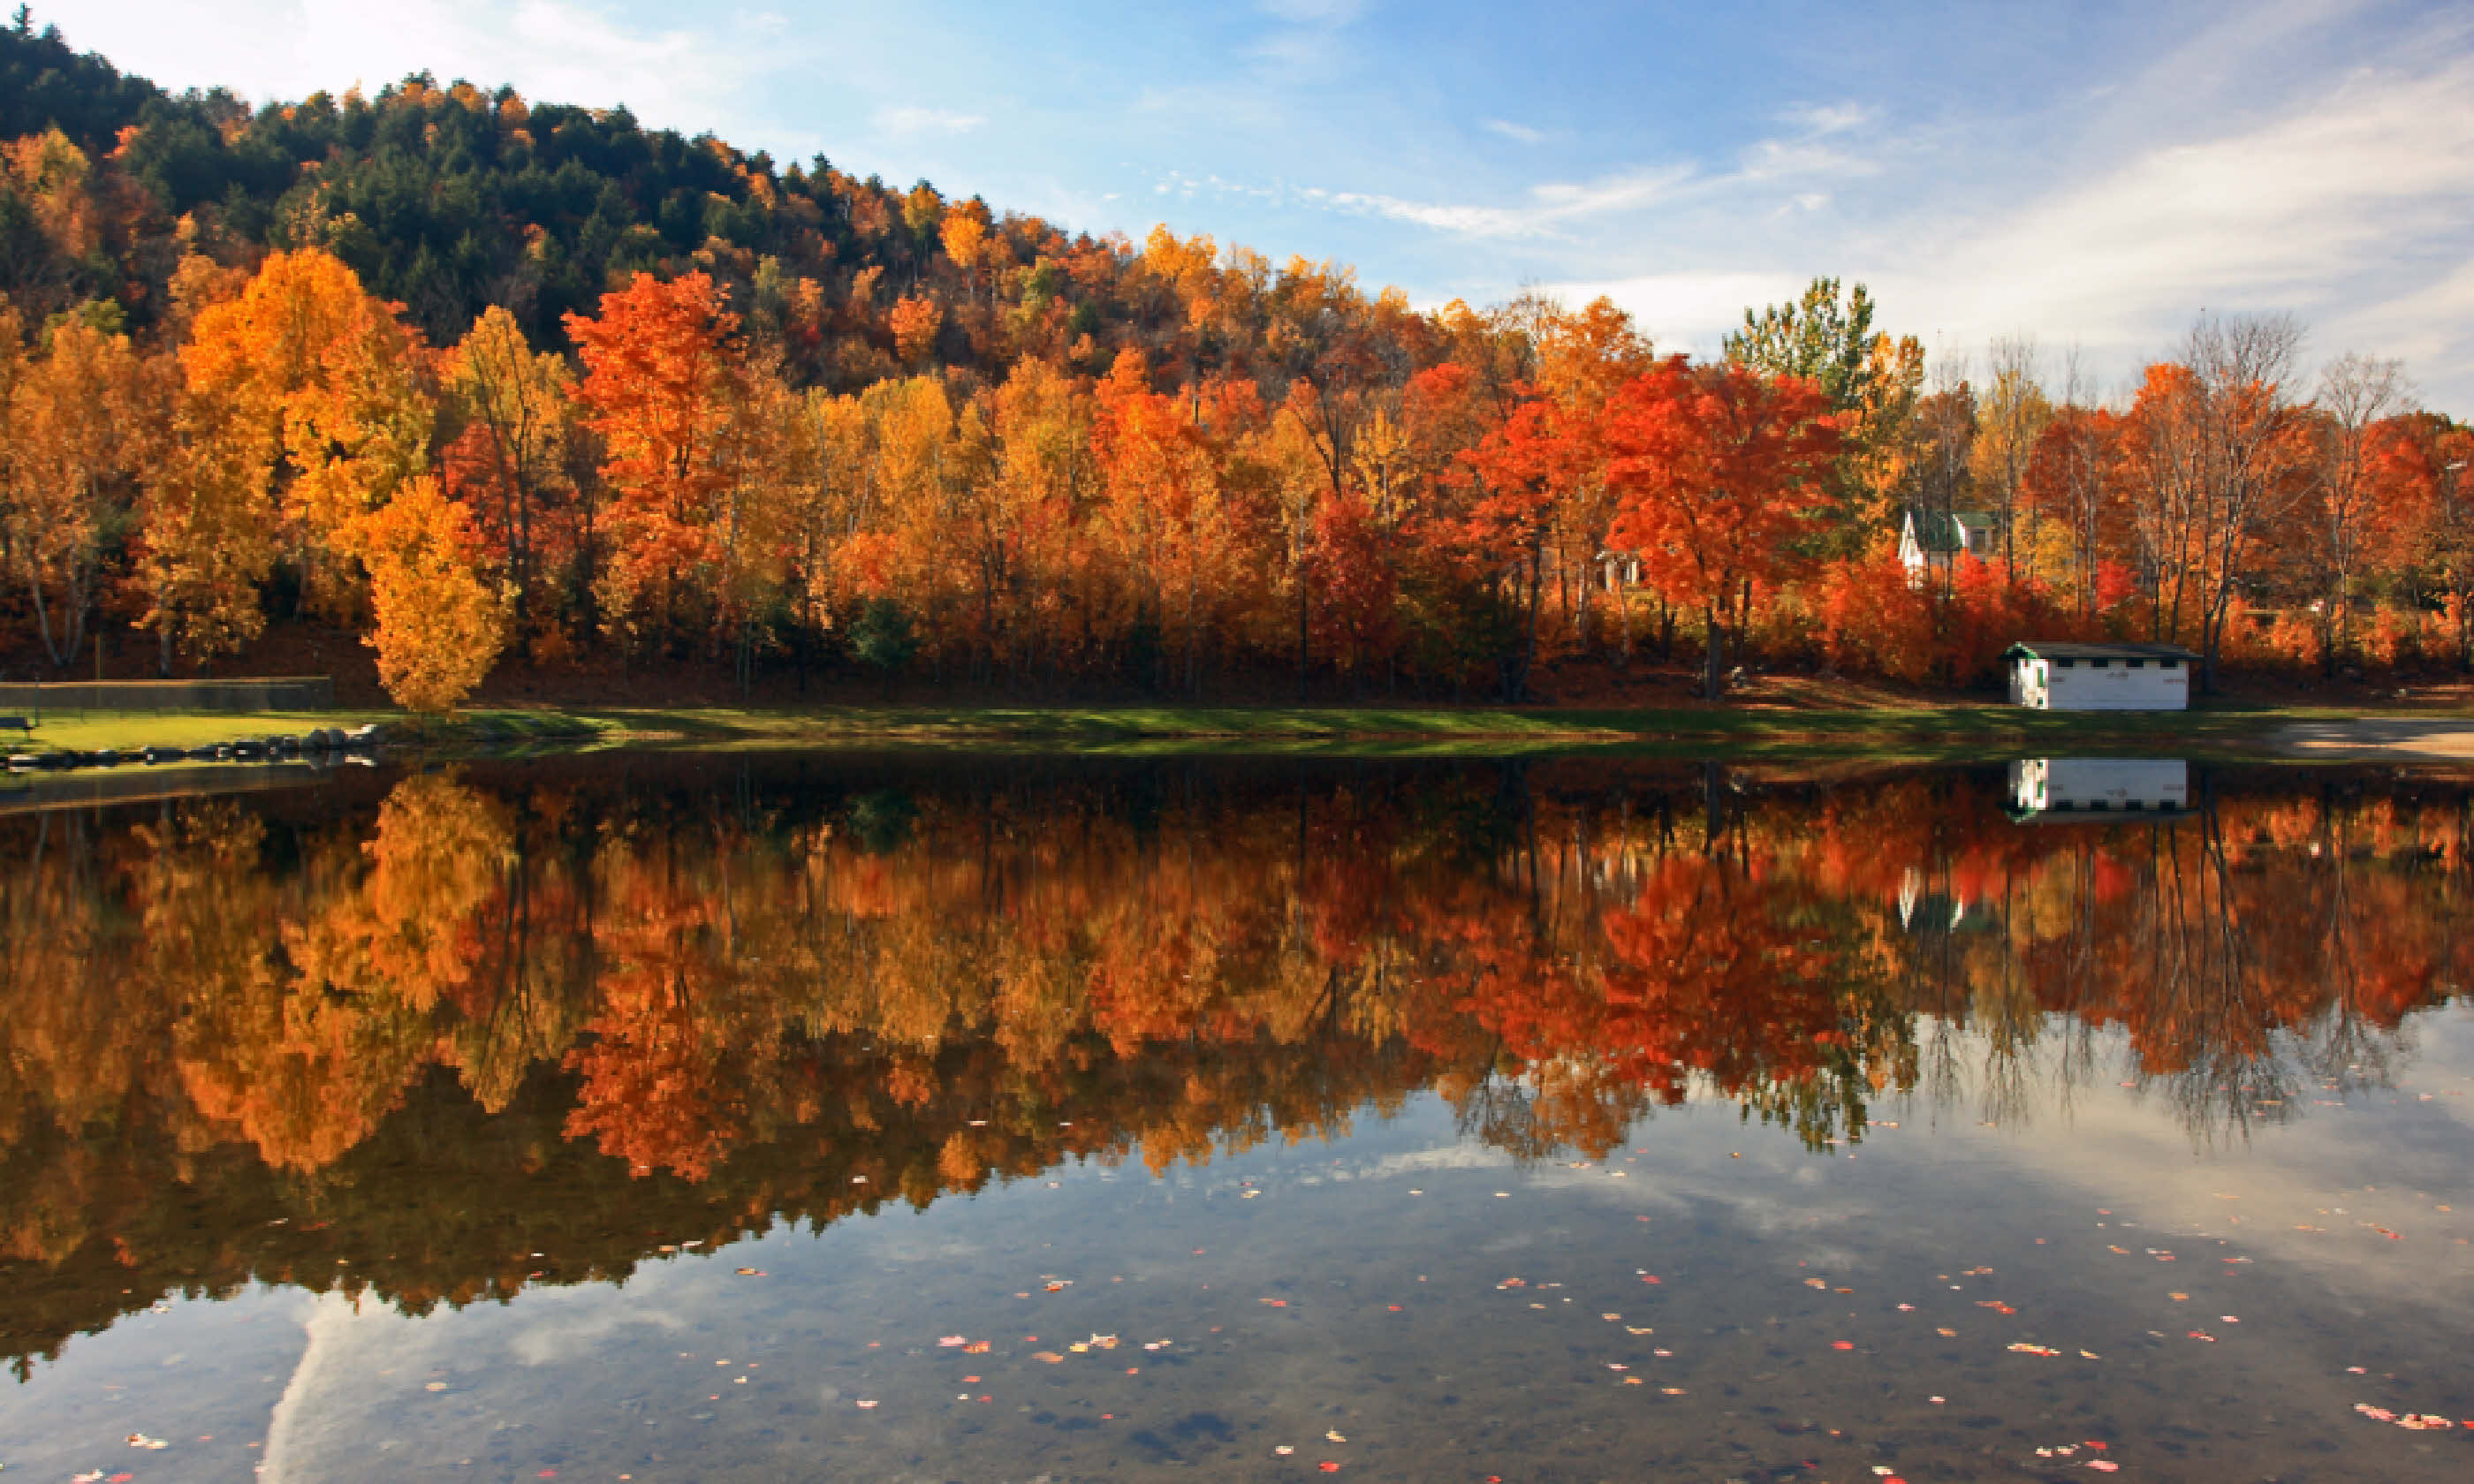 New England foliage along pond with reflection (Shutterstock)